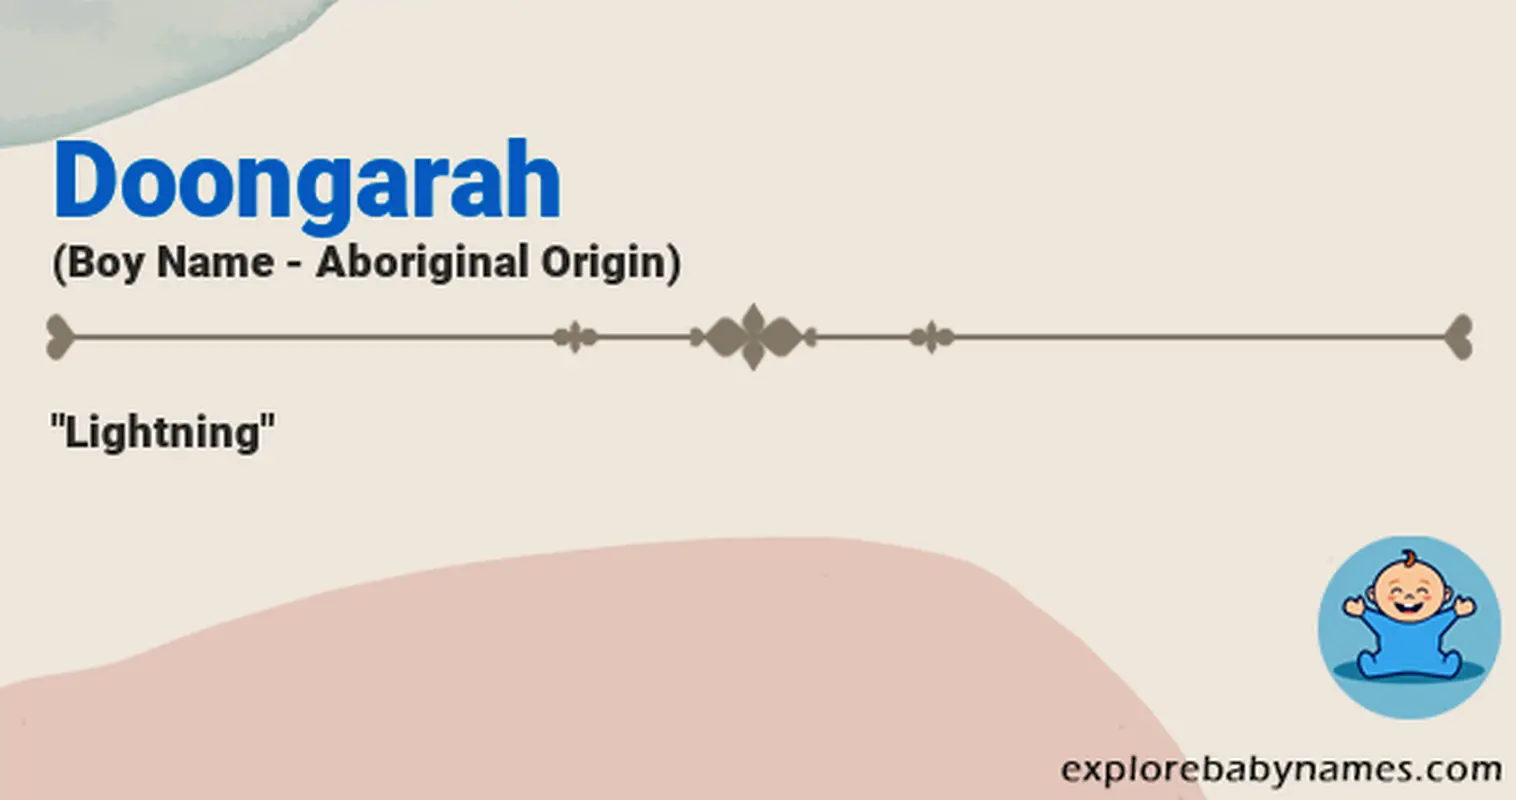 Meaning of Doongarah